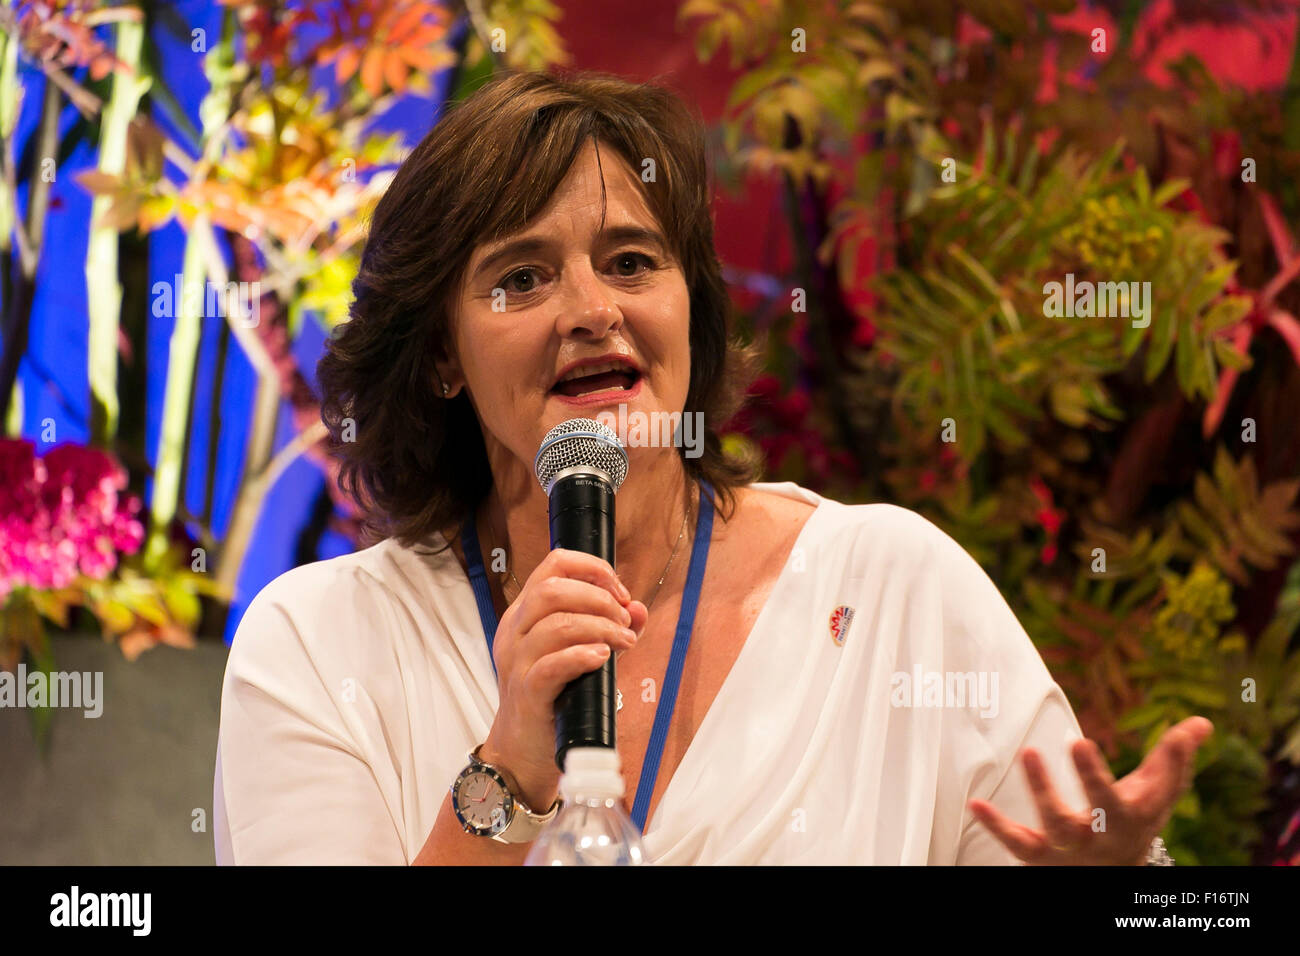 Cherie Blair wife of former British Prime Minister Tony Blair and Founder of Cherie Blair Foundation for Women speaks during The World Assembly for Women in Tokyo: WAW! 2015 on August 28, 2015, Tokyo, Japan. About 140 female leader (from 40 countries and 7 international organizations) attended the ''WAW! 2015'' to discuss the roles of women in politics, business and society. Prime Minister Abe has set a goal of increasing the representation of women in management roles to 30 percent by 2020. © Rodrigo Reyes Marin/AFLO/Alamy Live News Stock Photo